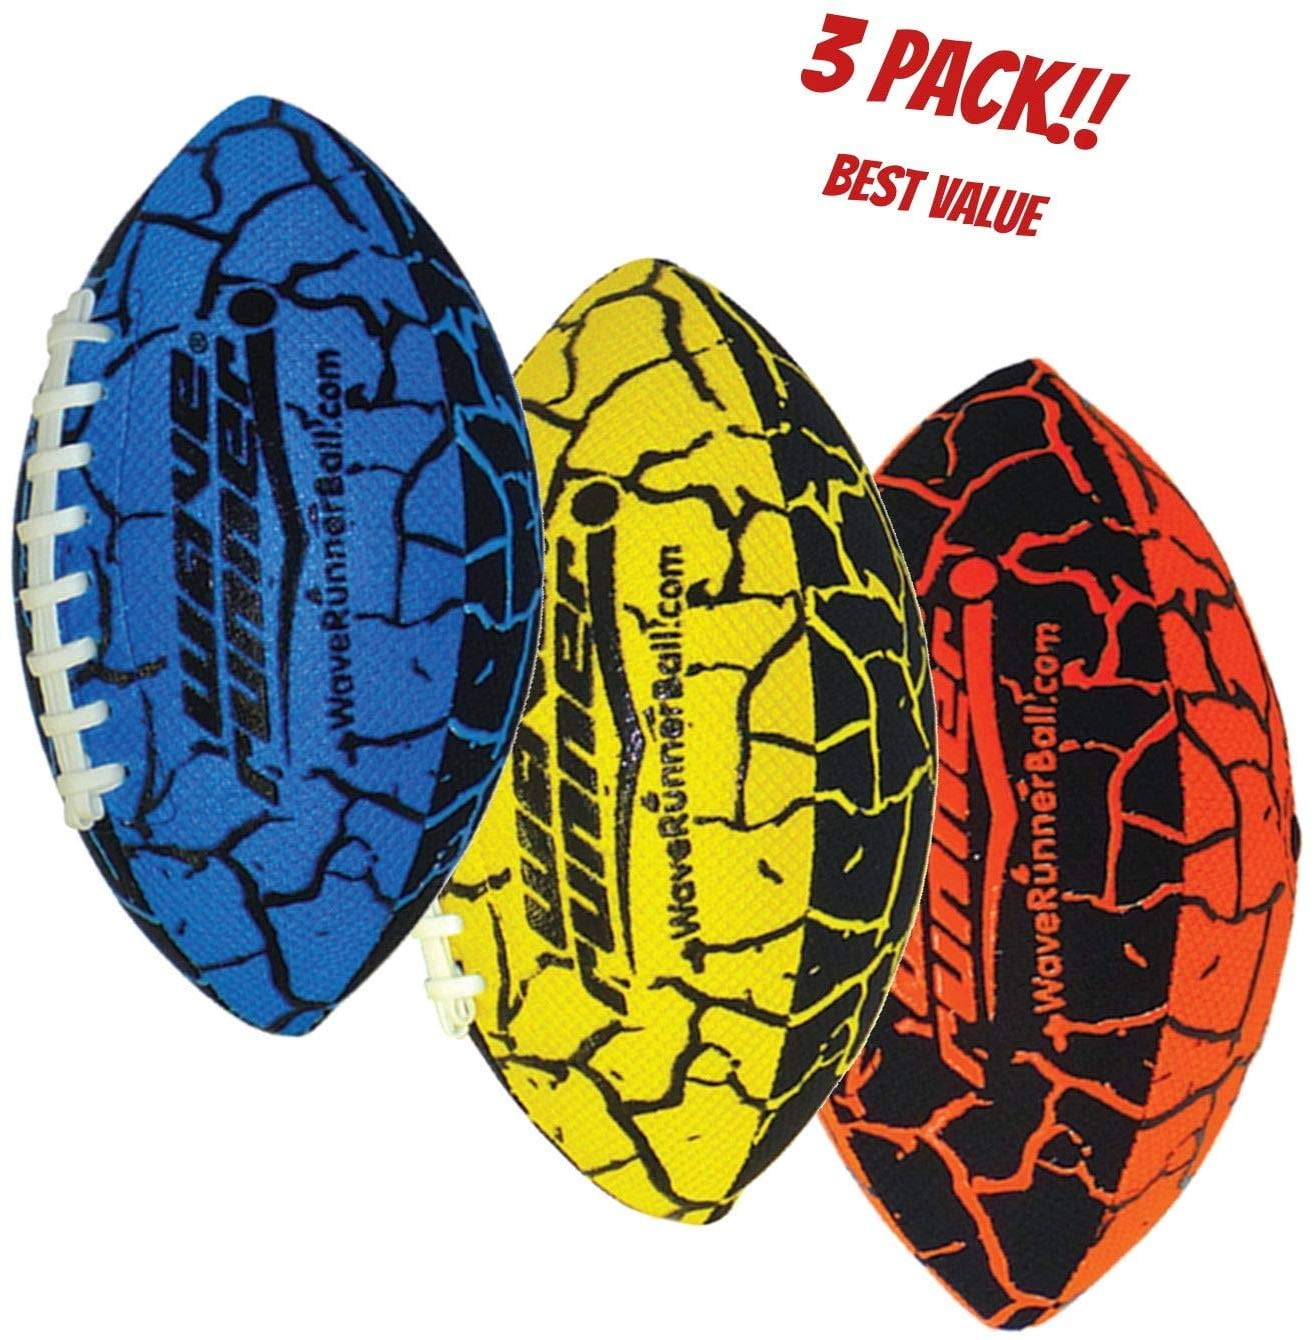 Black/Green Lets Play Football in The Water Xtreme Metallic Series Wave Runner Grip It Waterproof Football- Size 9.25 Inches with Sure-Grip Technology